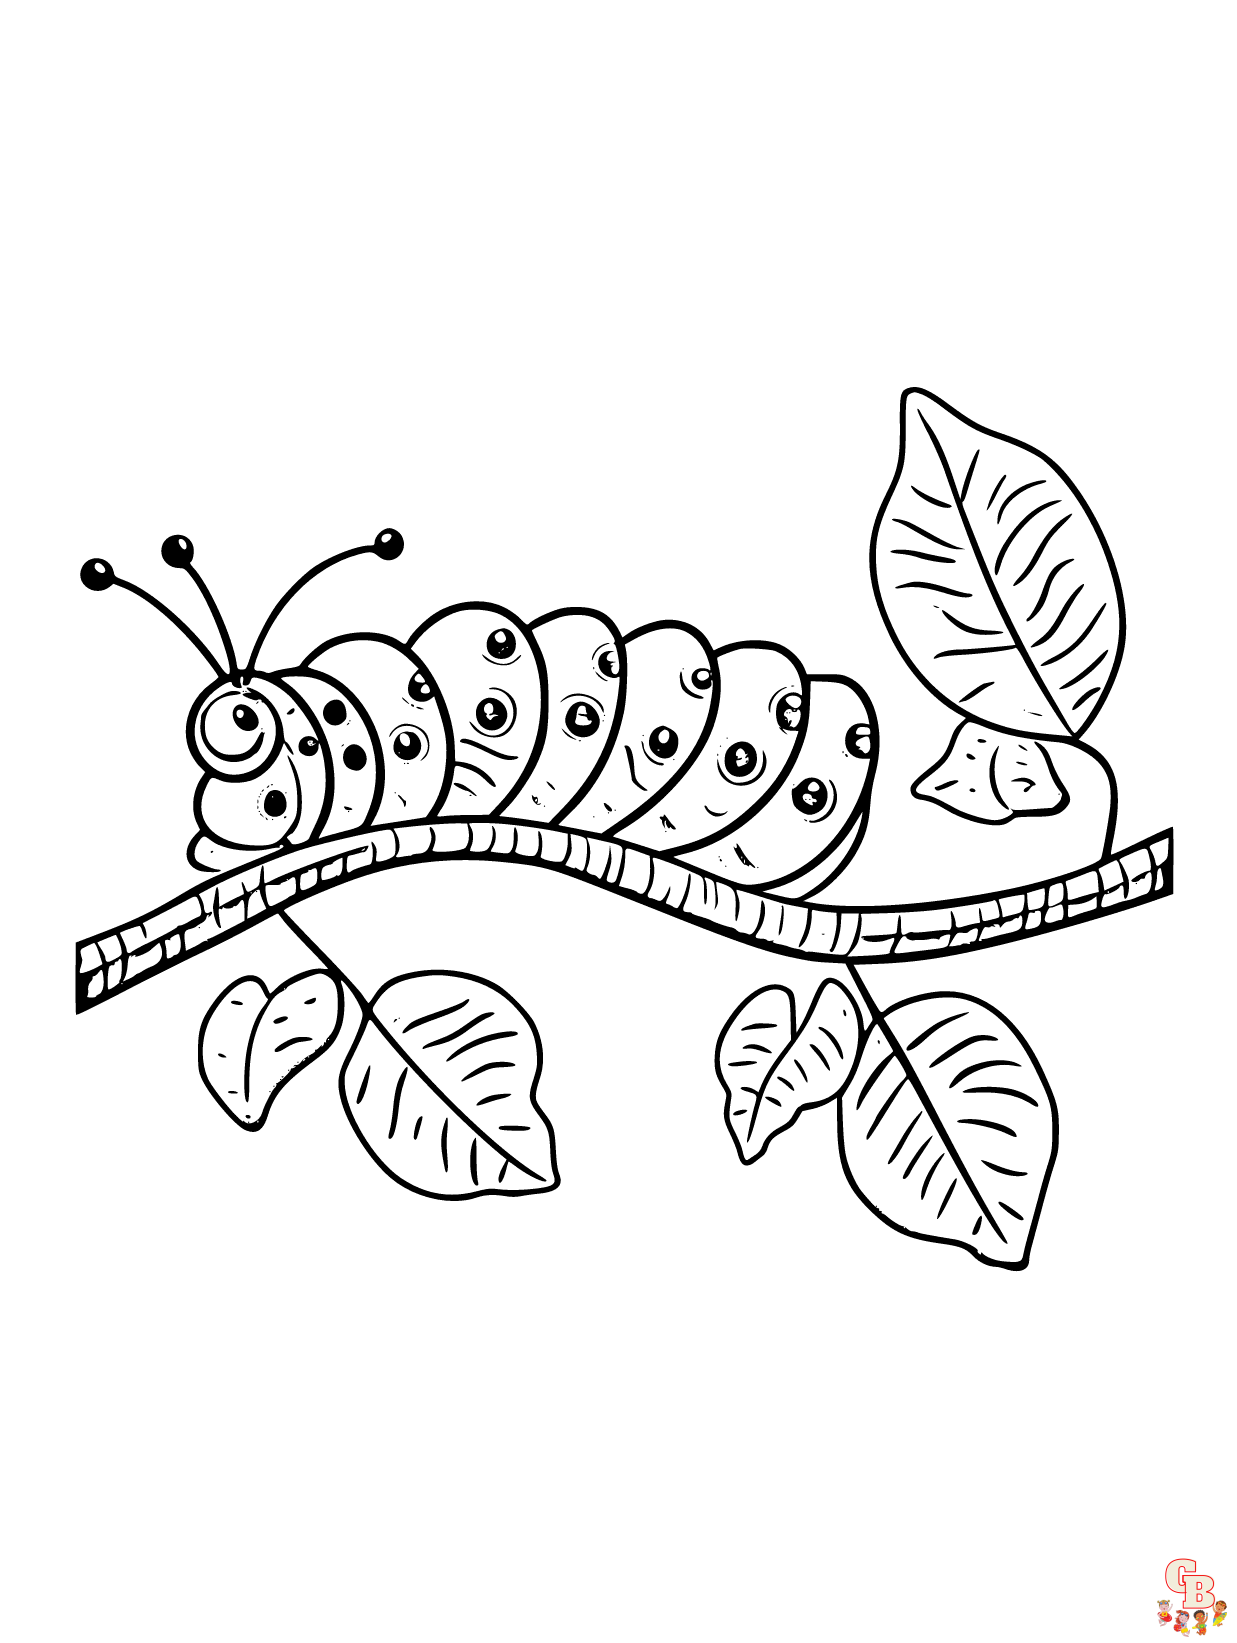 Caterpillar coloring pages free